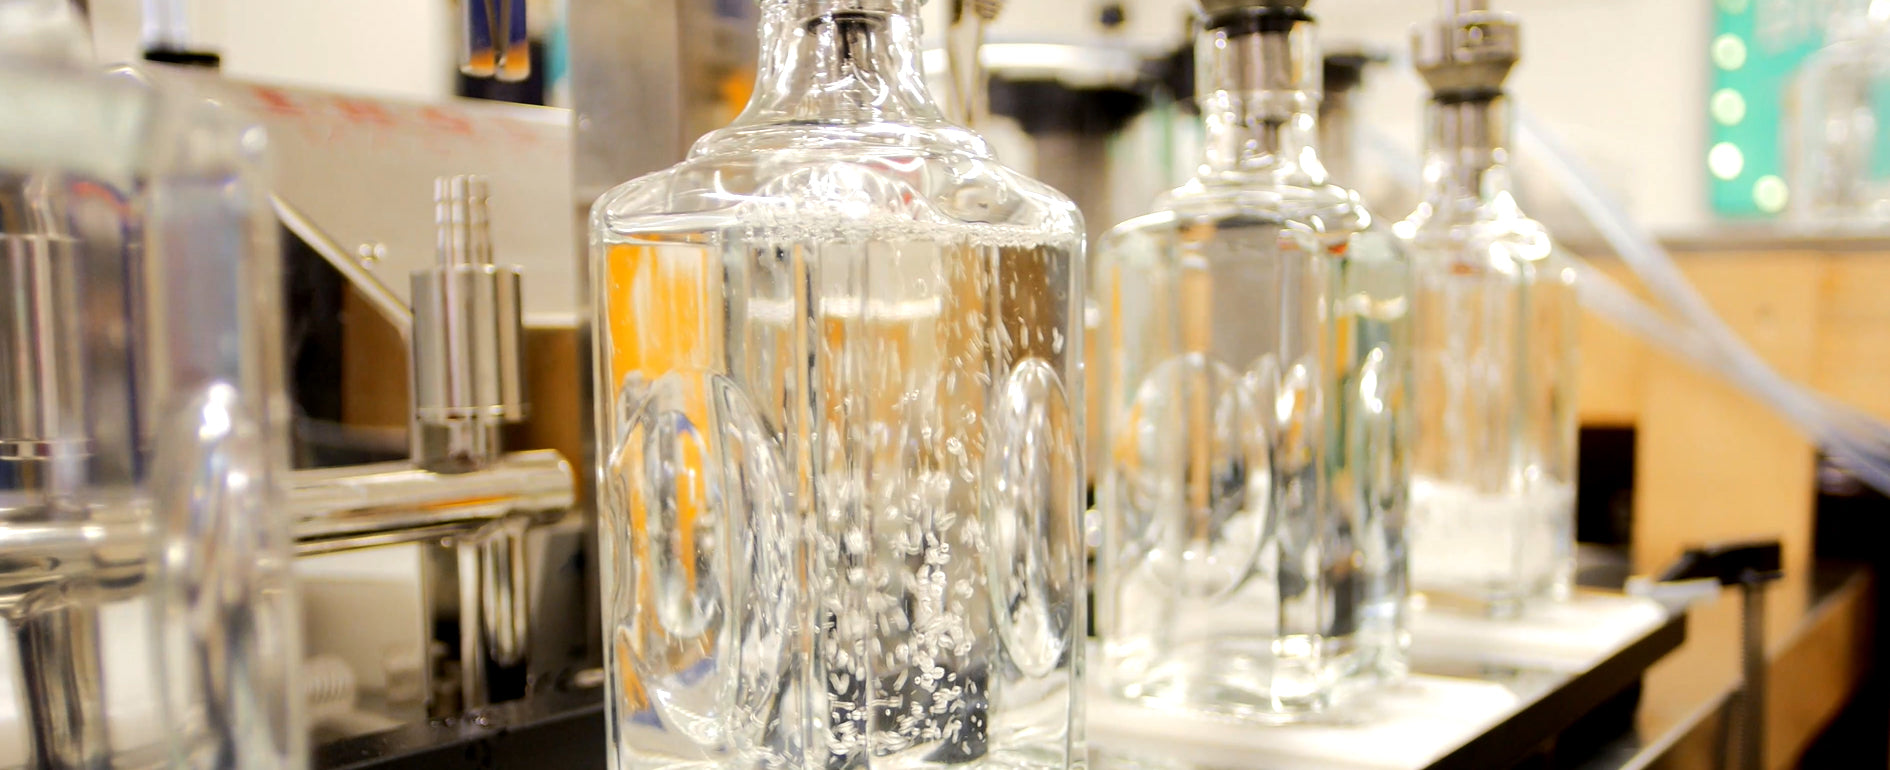 Bottling Brighton Gin at the gin distillery in Sussex